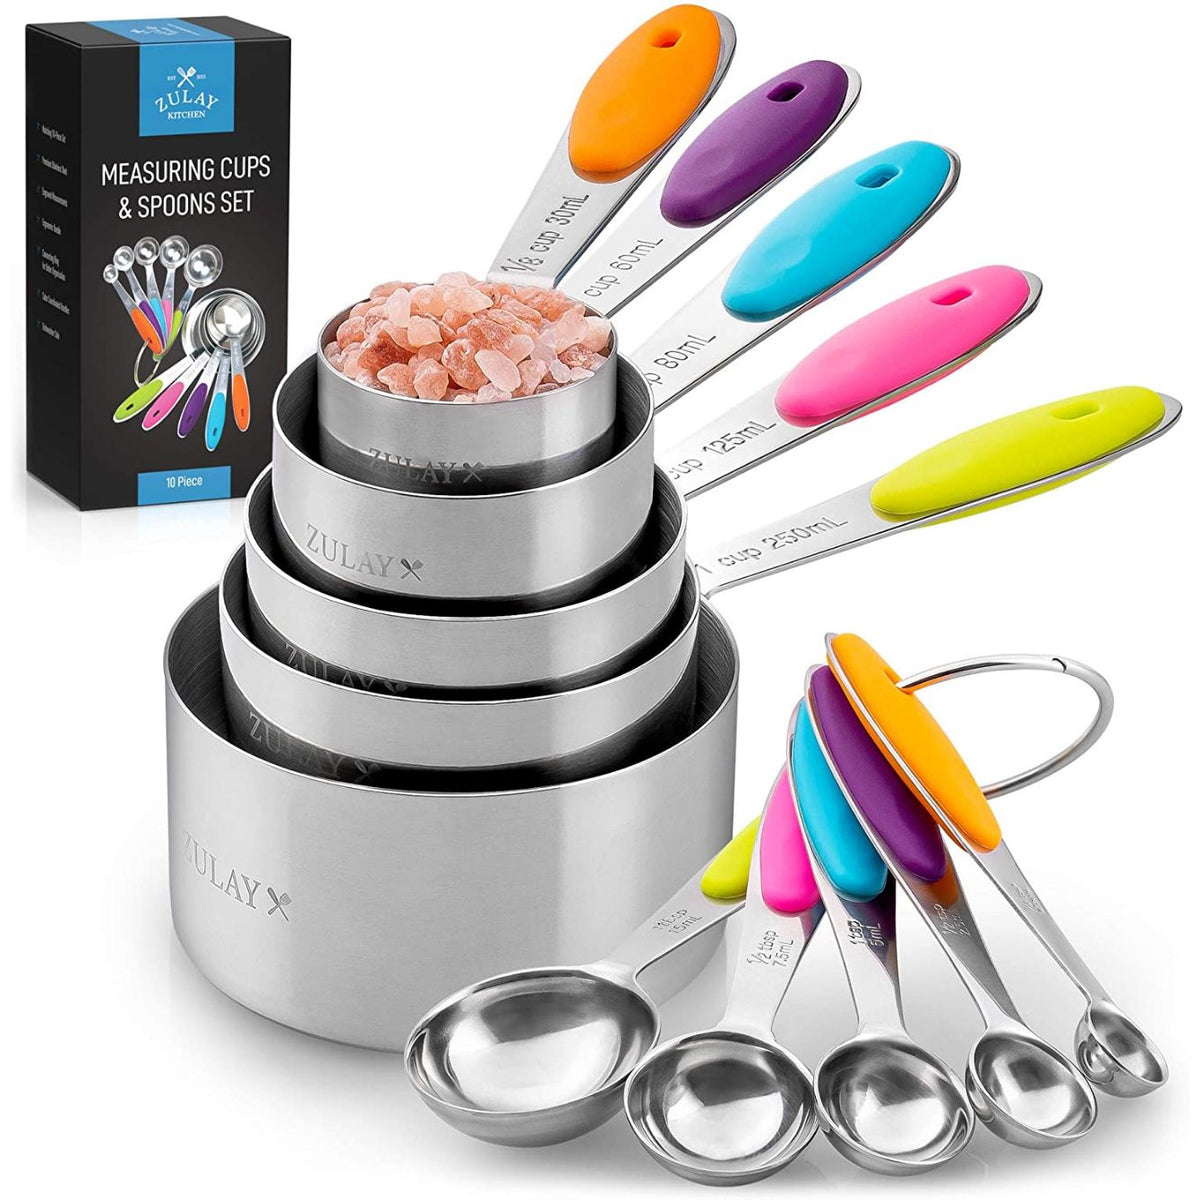 Measuring Cups and Spoons – CuttleLab